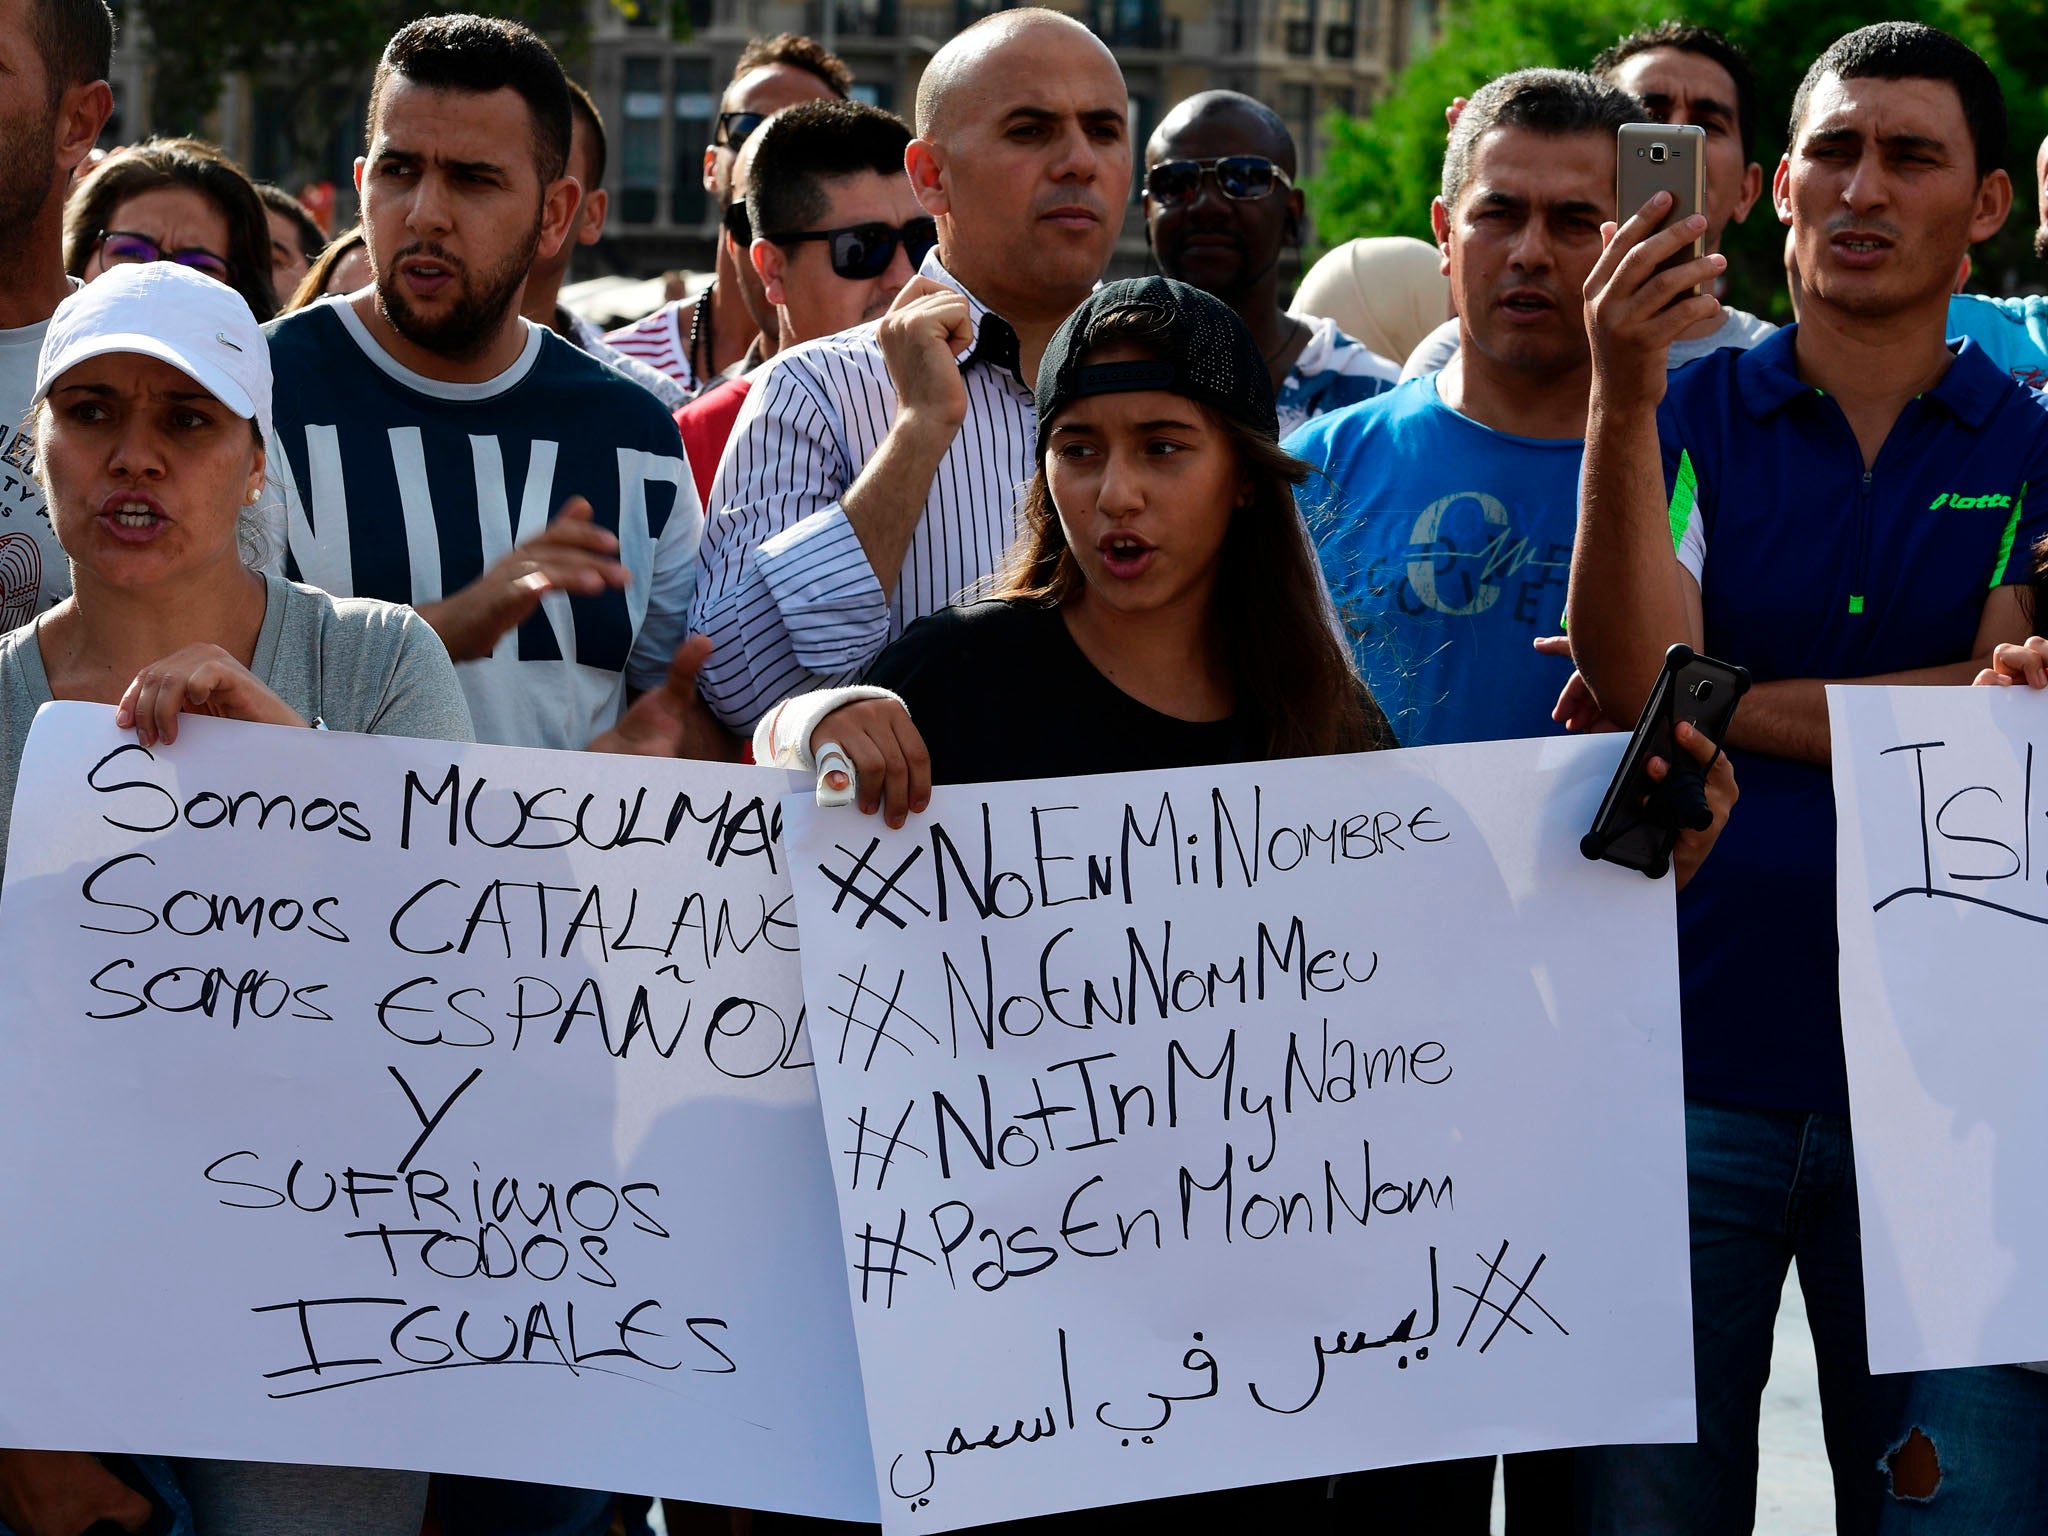 Muslim residents in Barcelona march along Las Ramblas to the Plaza de Catalunya to protest against terrorism